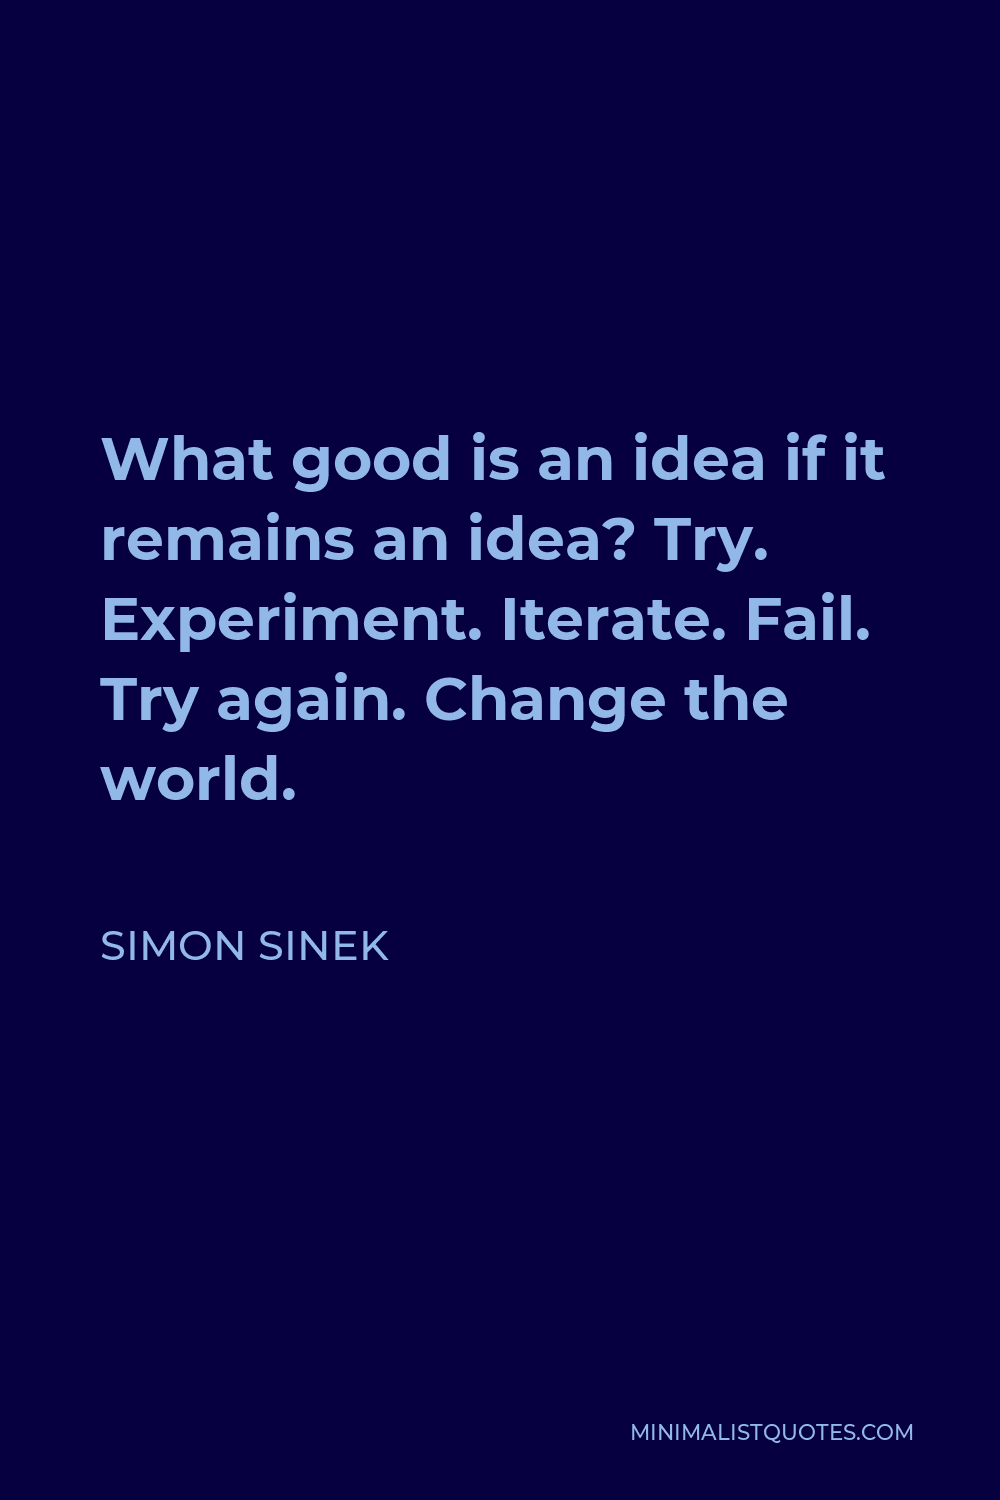 Simon Sinek Quote - What good is an idea if it remains an idea? Try. Experiment. Iterate. Fail. Try again. Change the world.